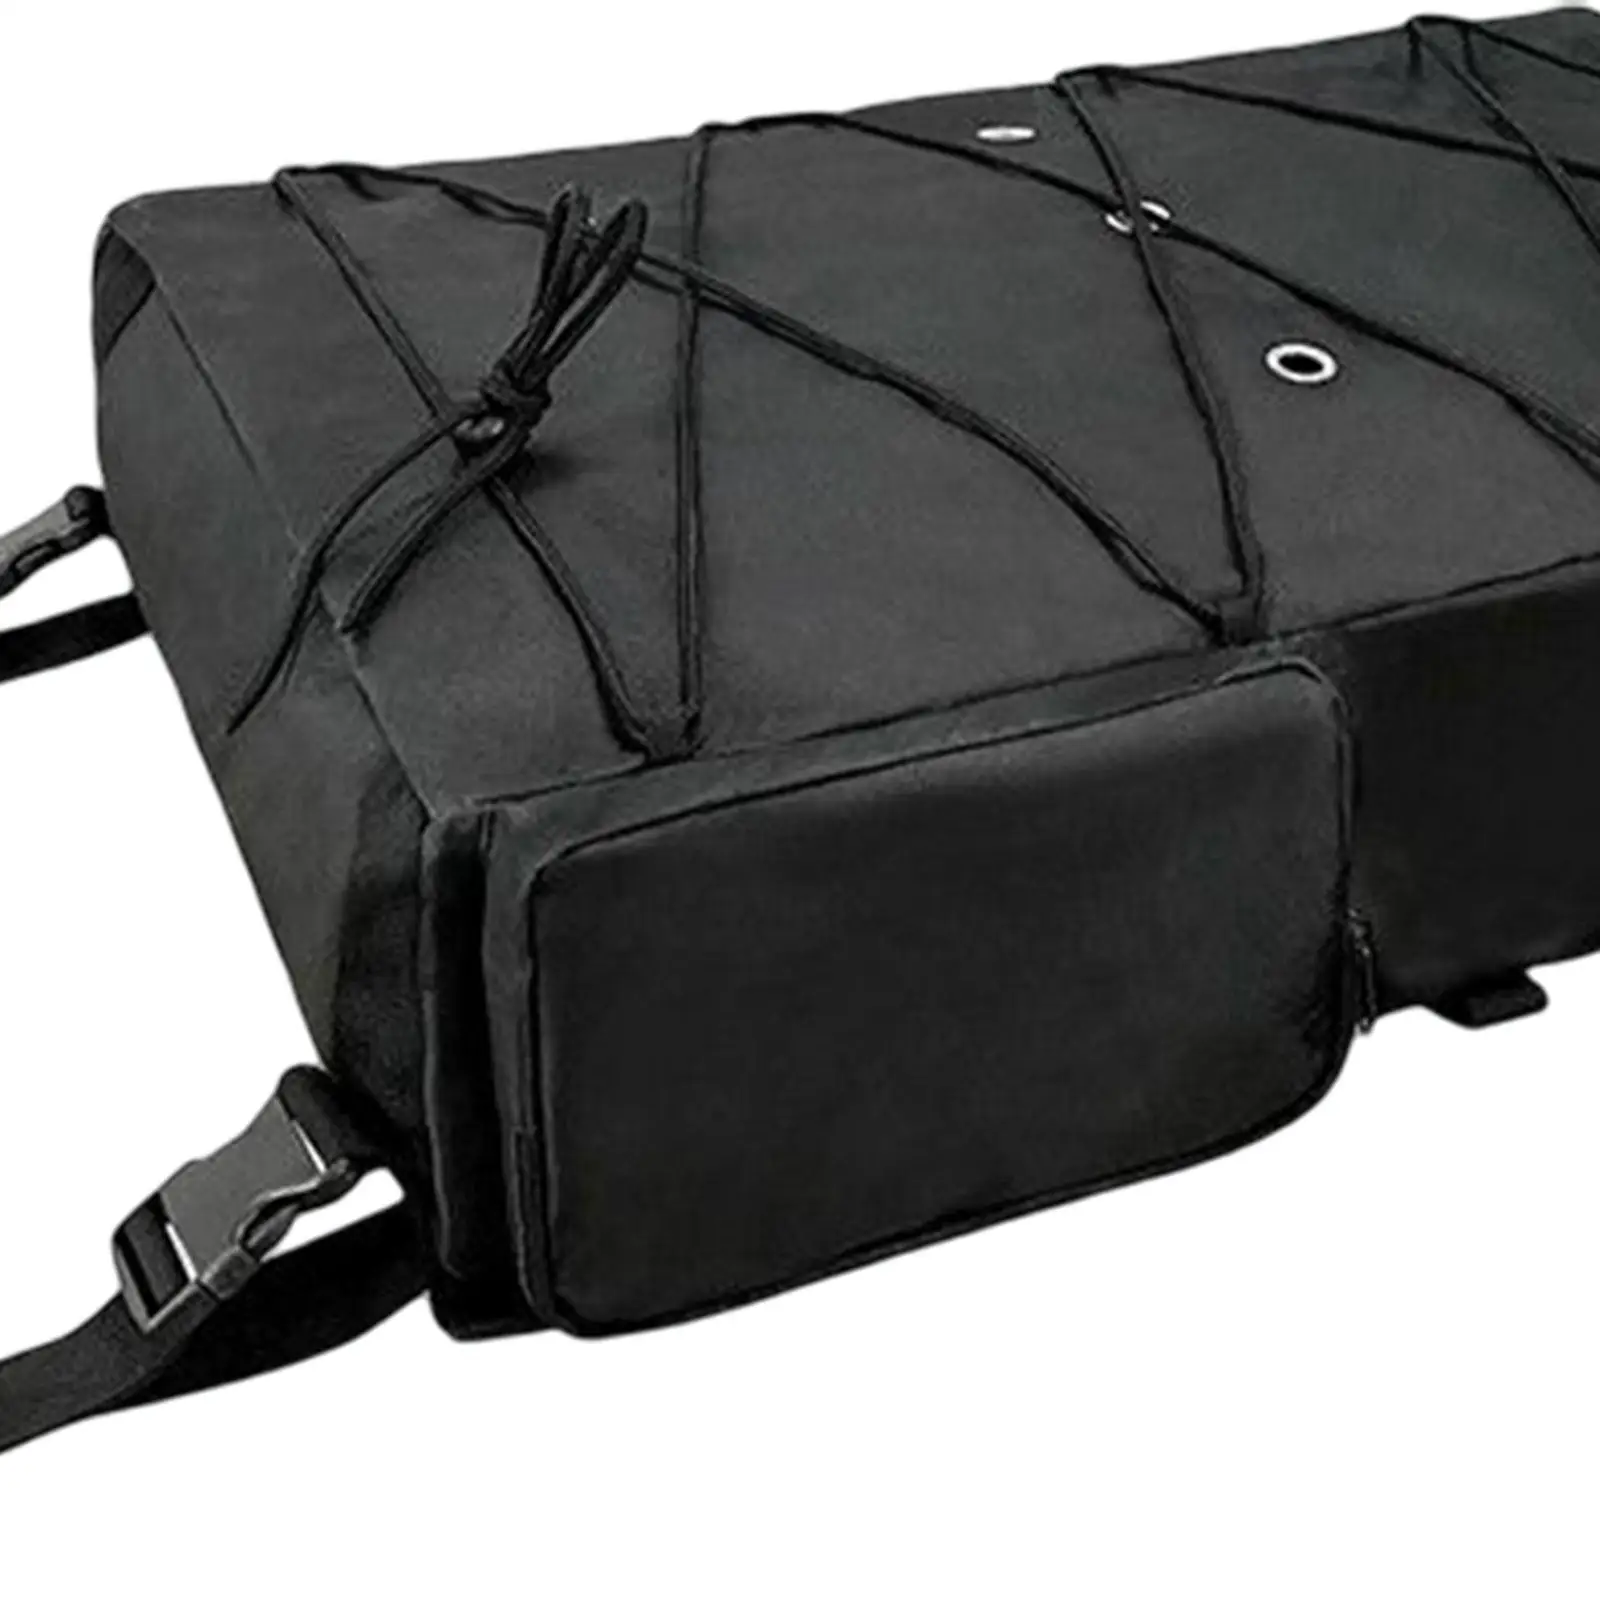 T Top Bag 600D Oxford Fabric Waterproof with Mesh Pockets Bimini Top Storage Bags Jacket Storage Bag for T Top Boats